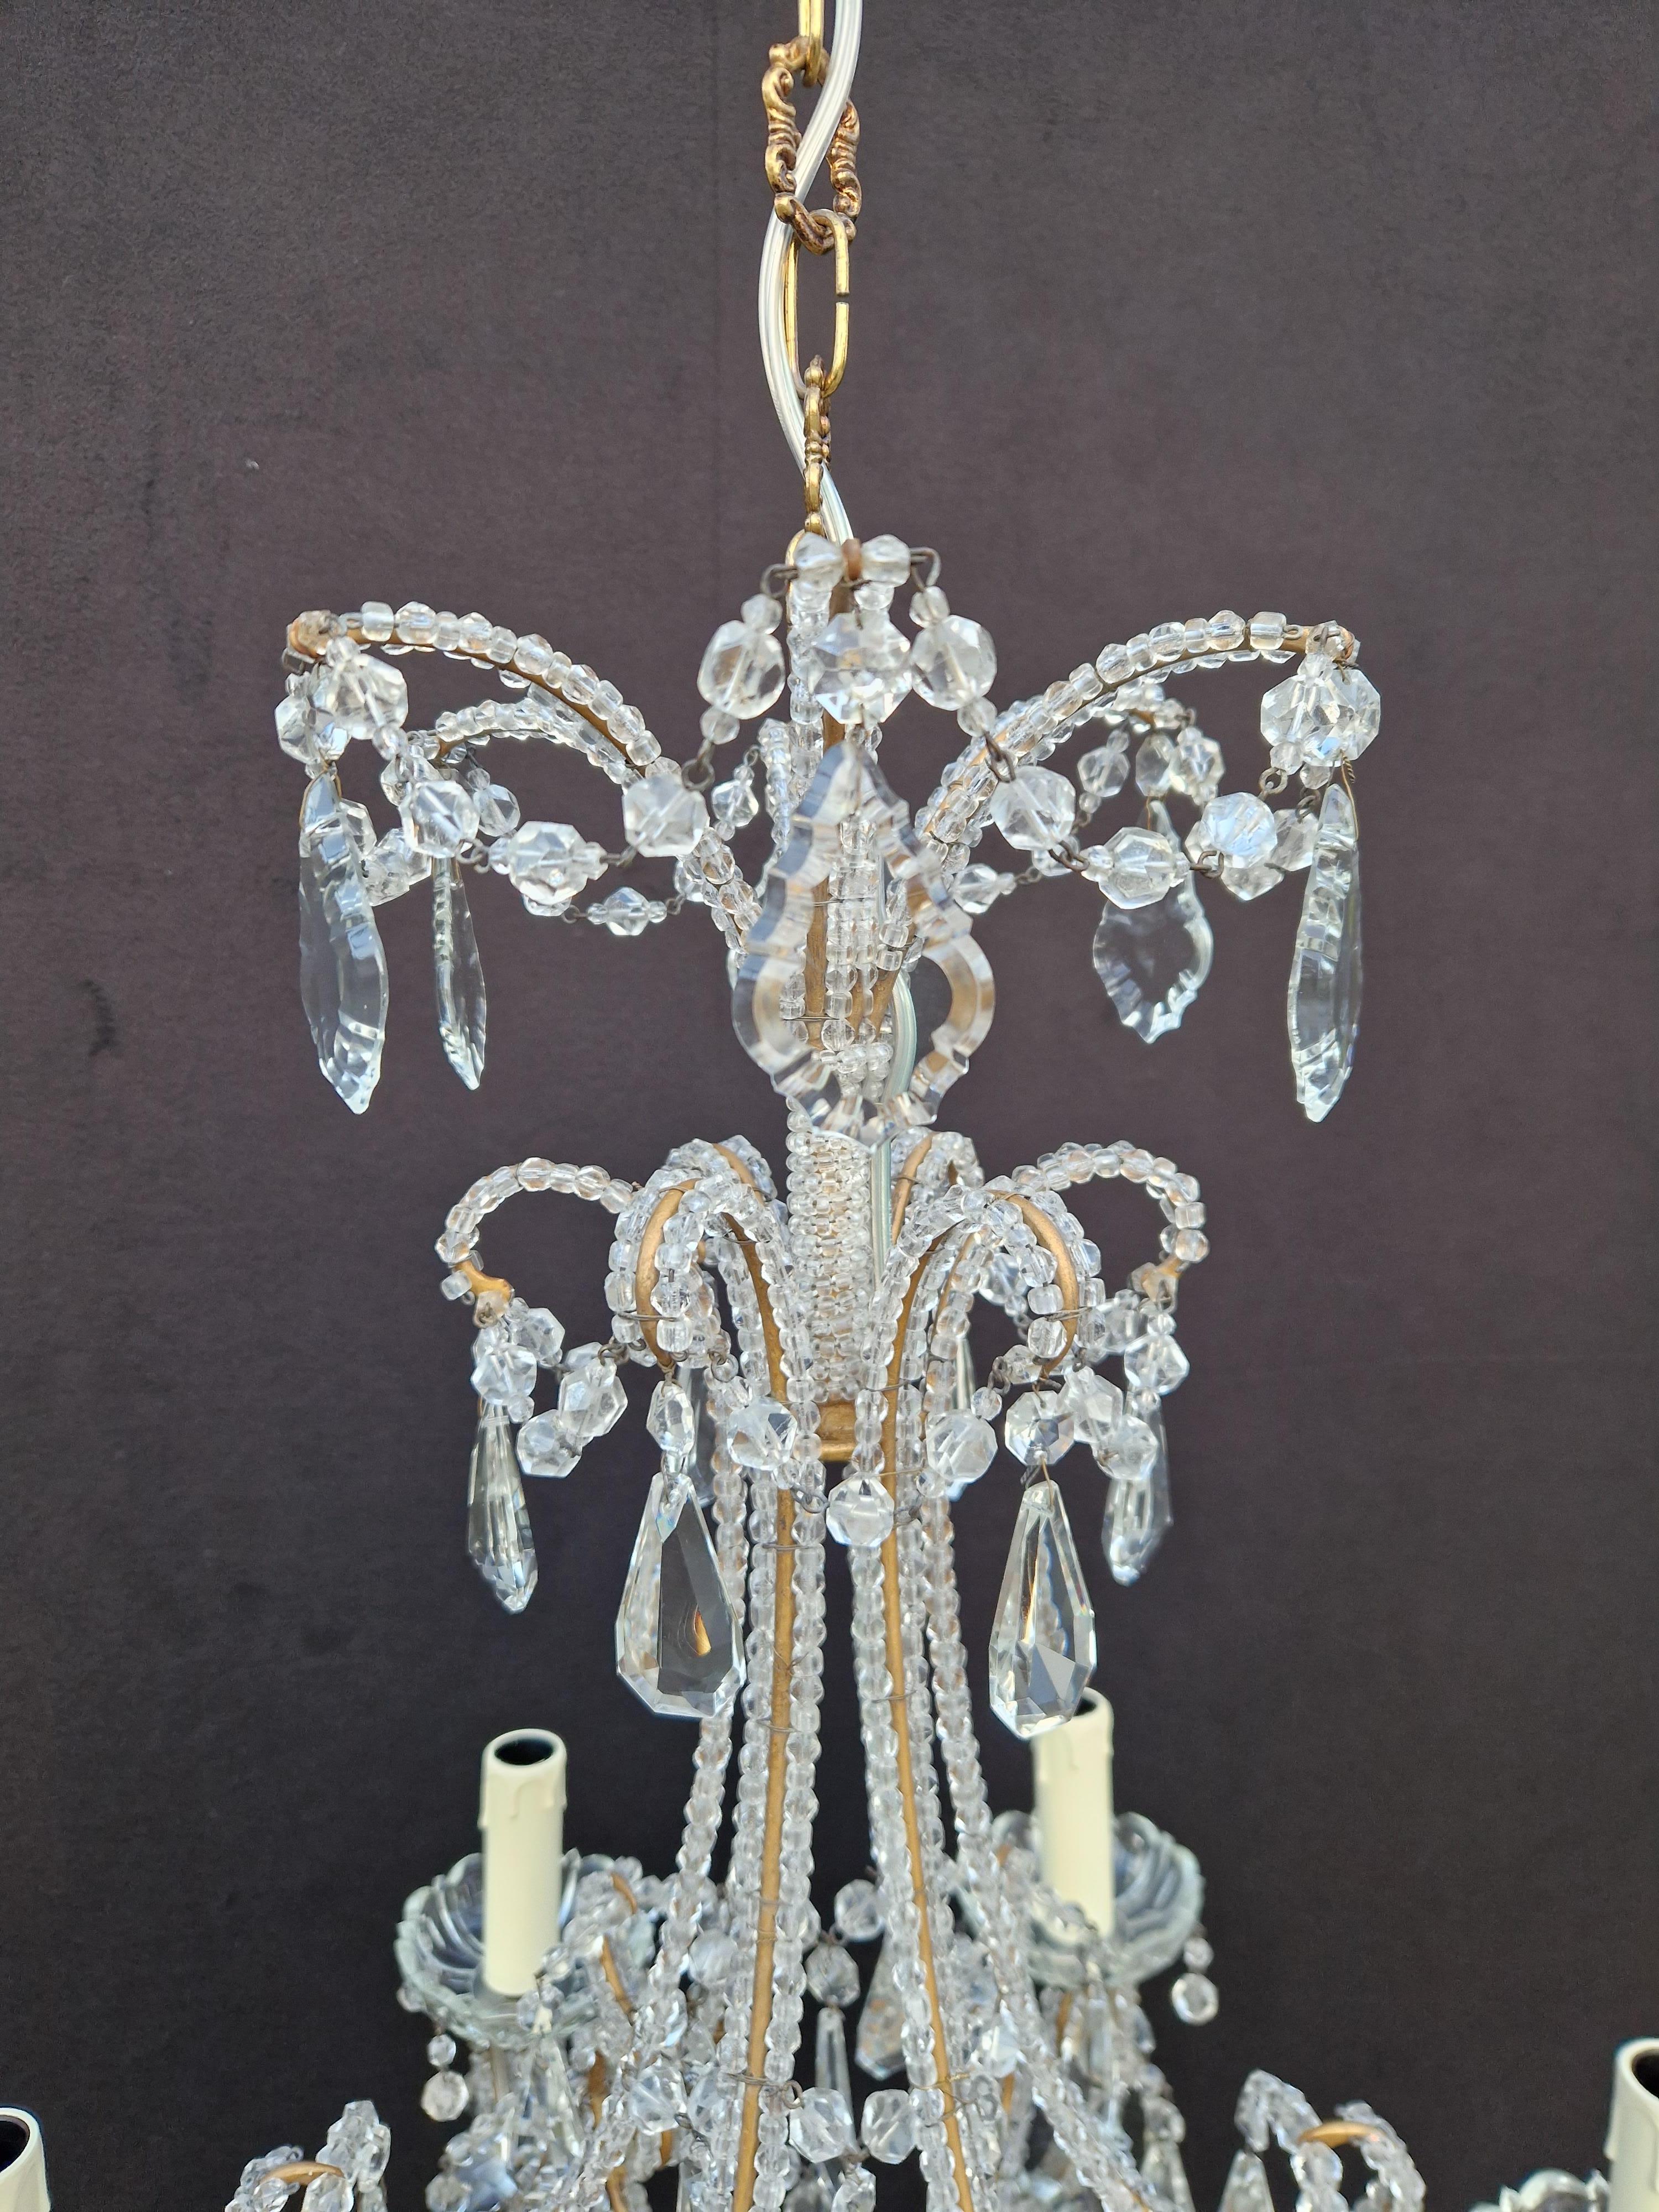 Introducing our exquisite Candelabrum Crystal Antique Chandelier, a masterpiece that embodies the elegance of Art Nouveau.

Measuring a total height of 90 cm (height without chain 65 cm) and a diameter of 51 cm, this chandelier exudes timeless